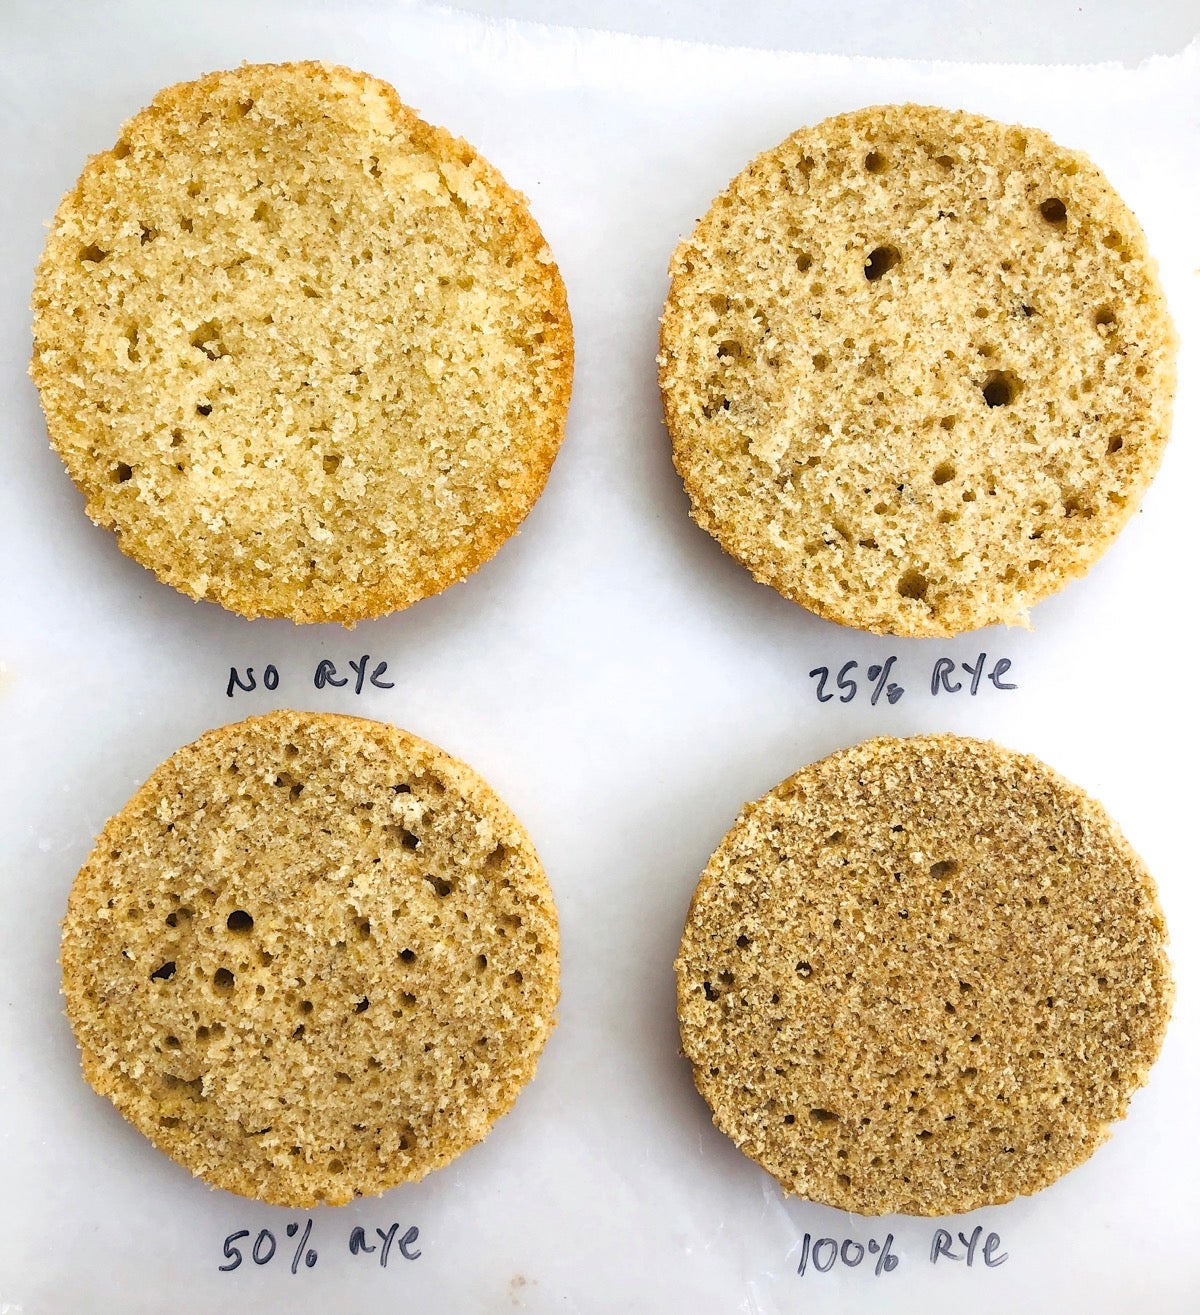 Cross sections of Doughnut Muffins made with three levels of rye flour, plus a control made with al-purpose flour.